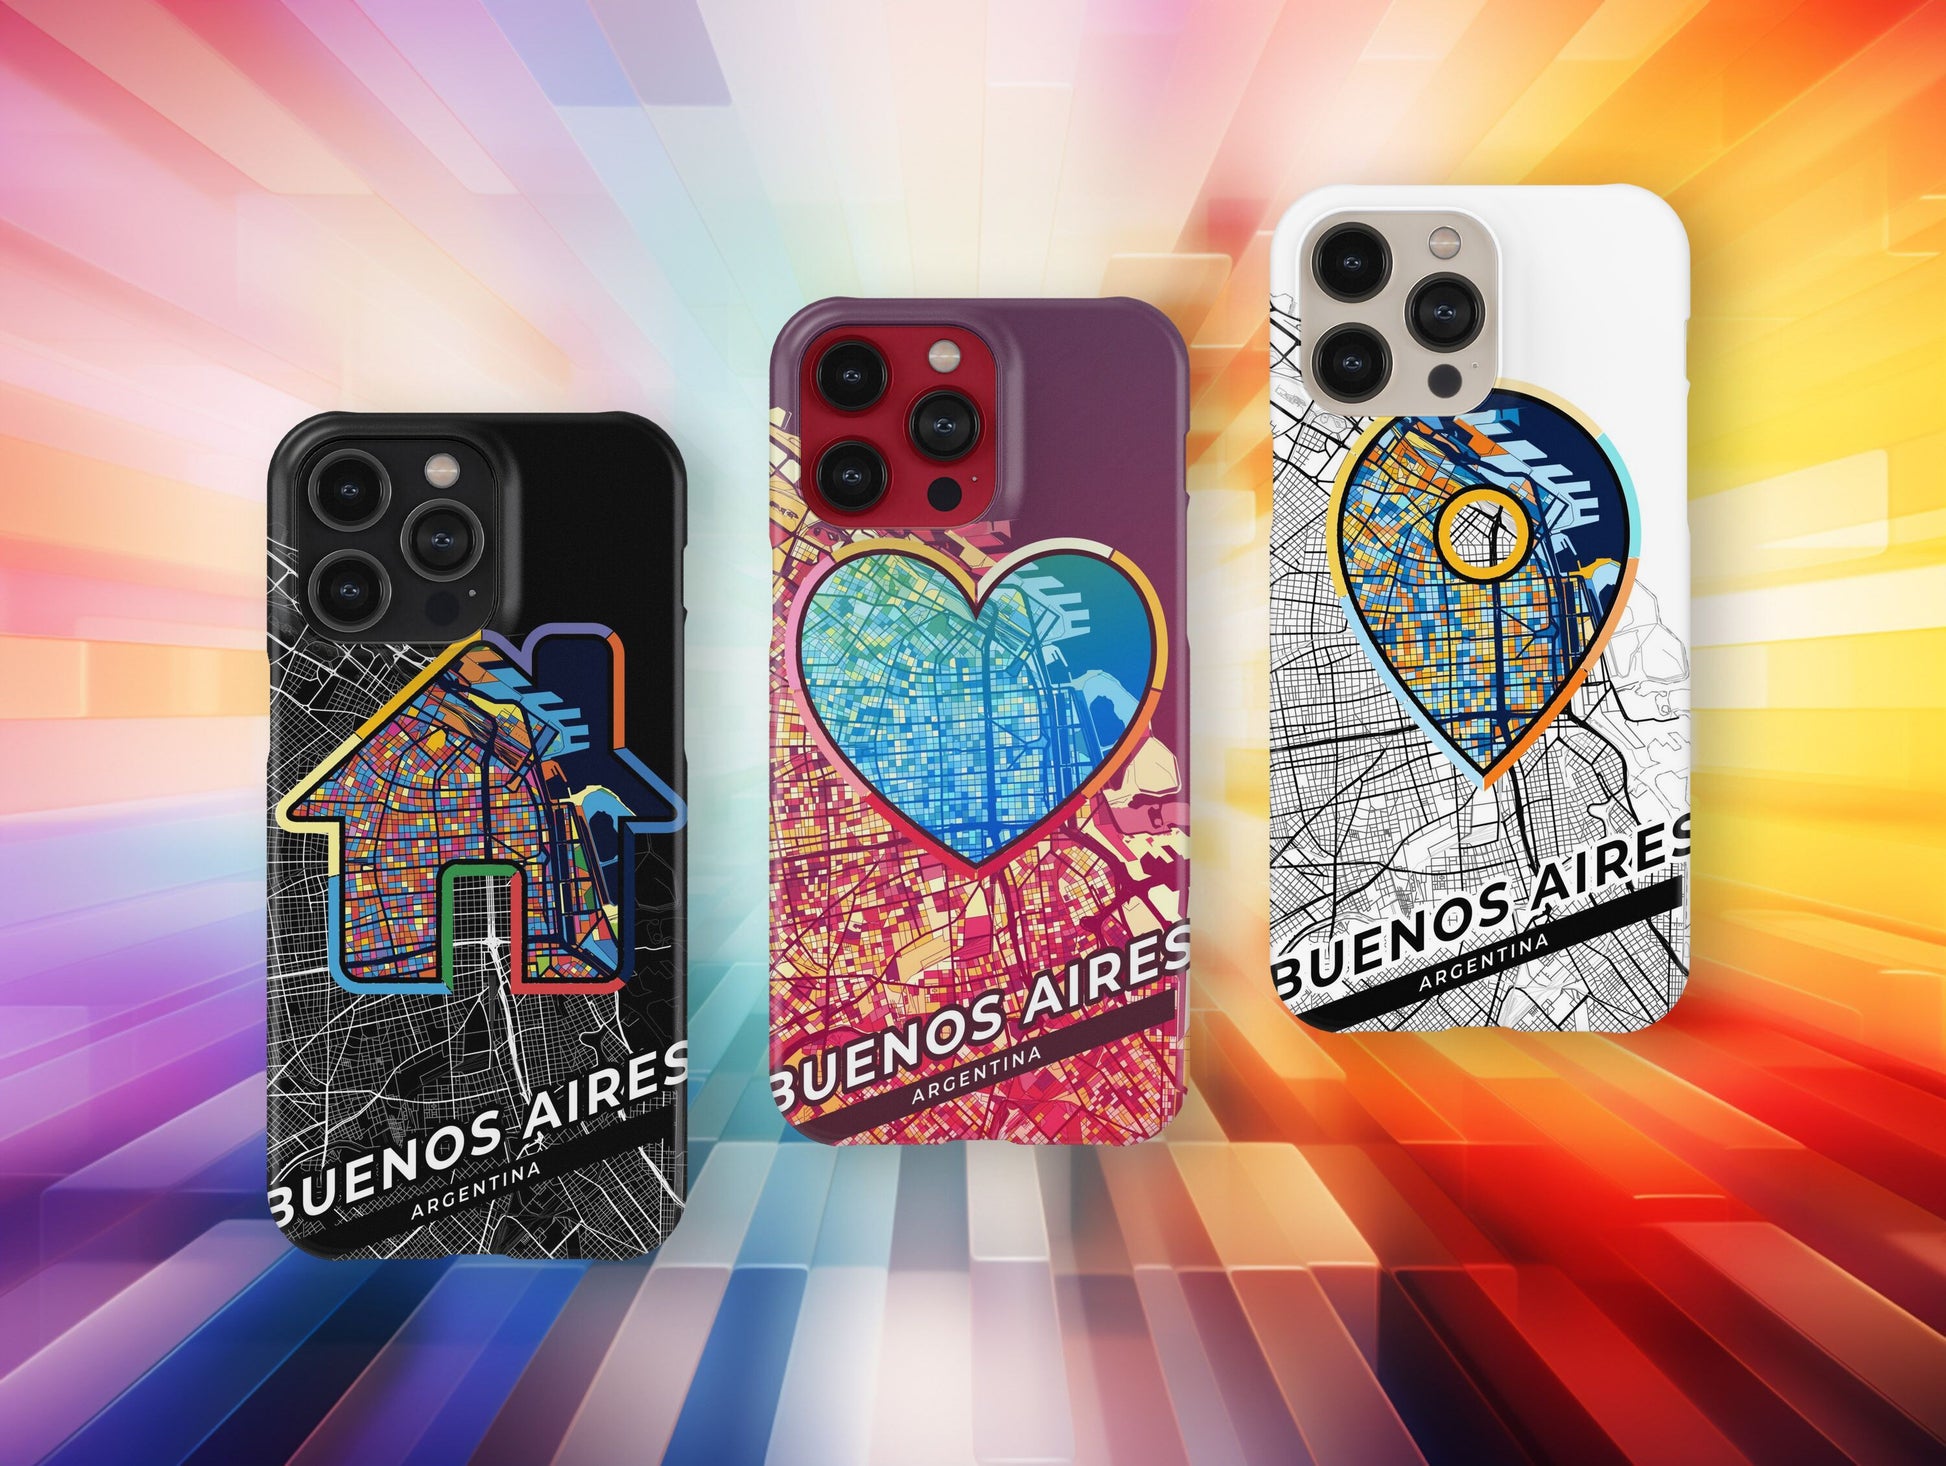 Buenos Aires Argentina slim phone case with colorful icon. Birthday, wedding or housewarming gift. Couple match cases.